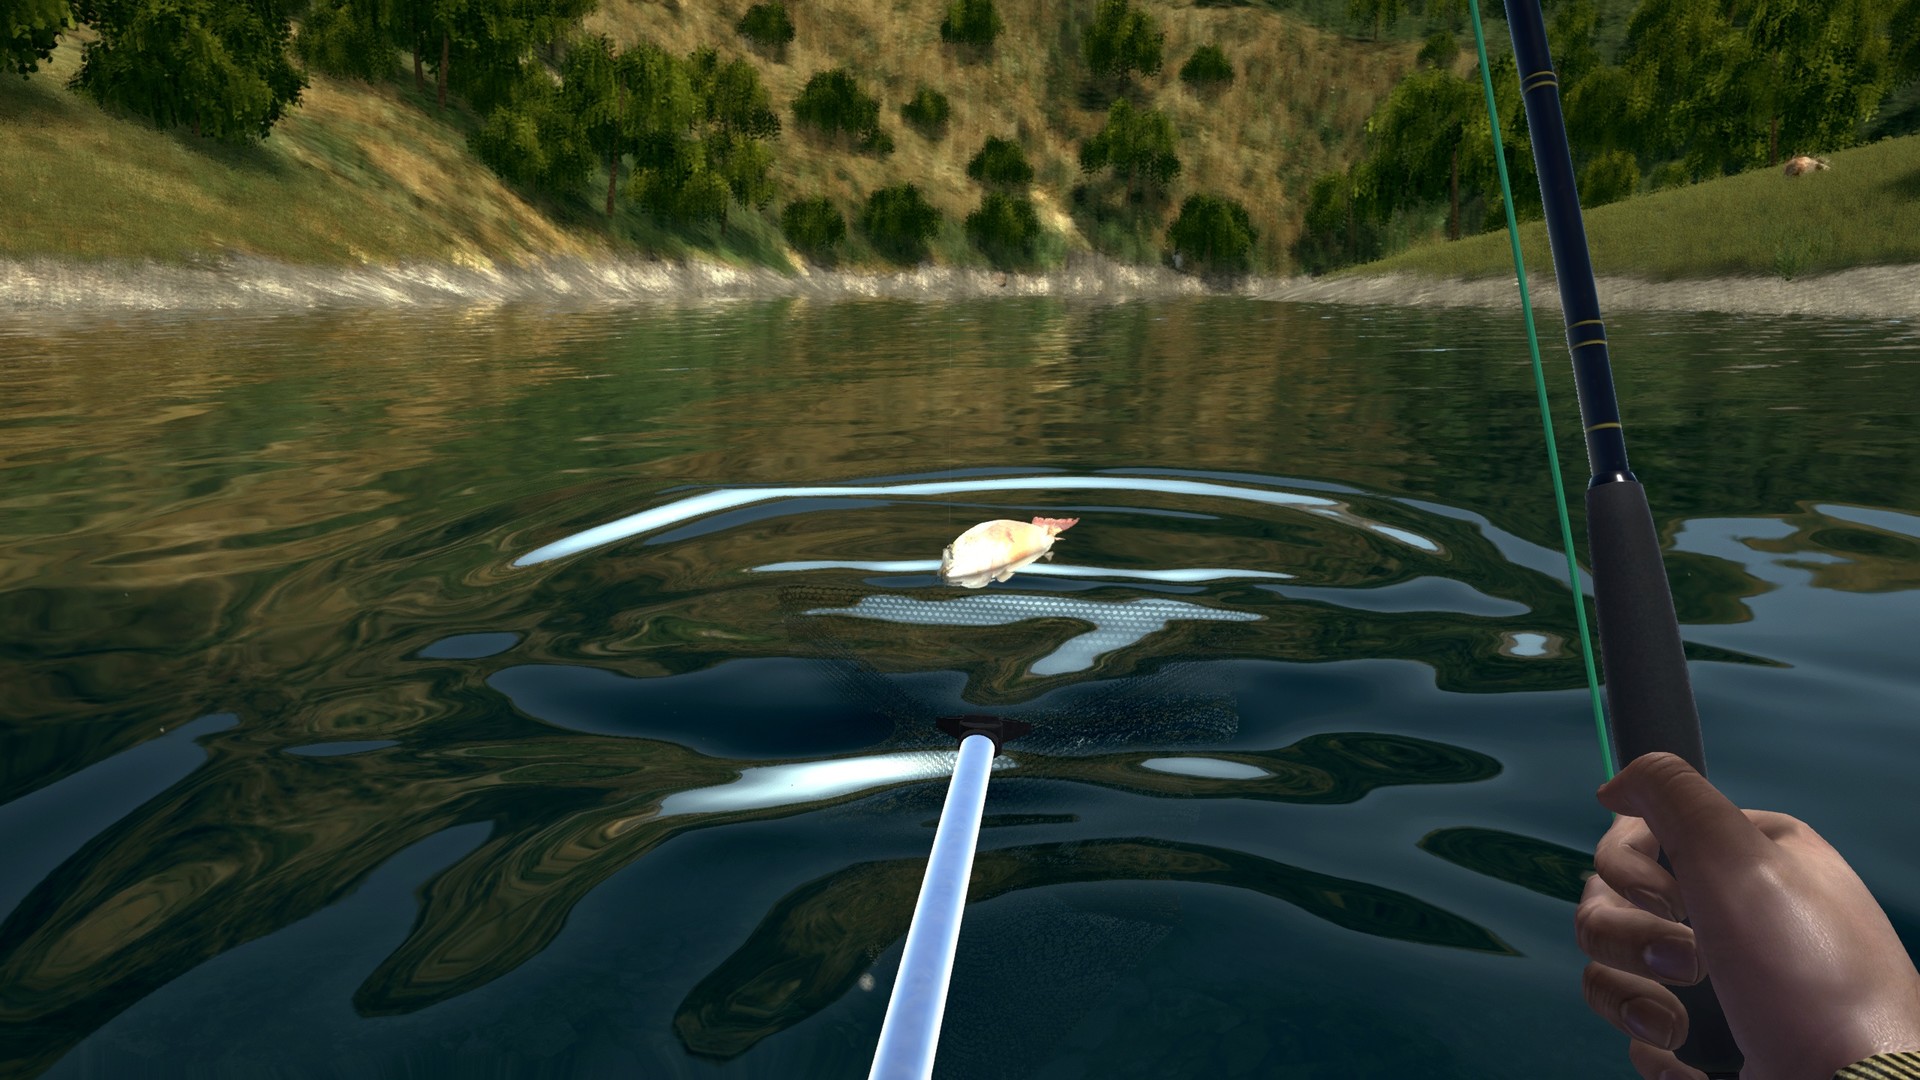 Ultimate Fishing Simulator PC review - One of the very best fishing sim  games on the market - TGG